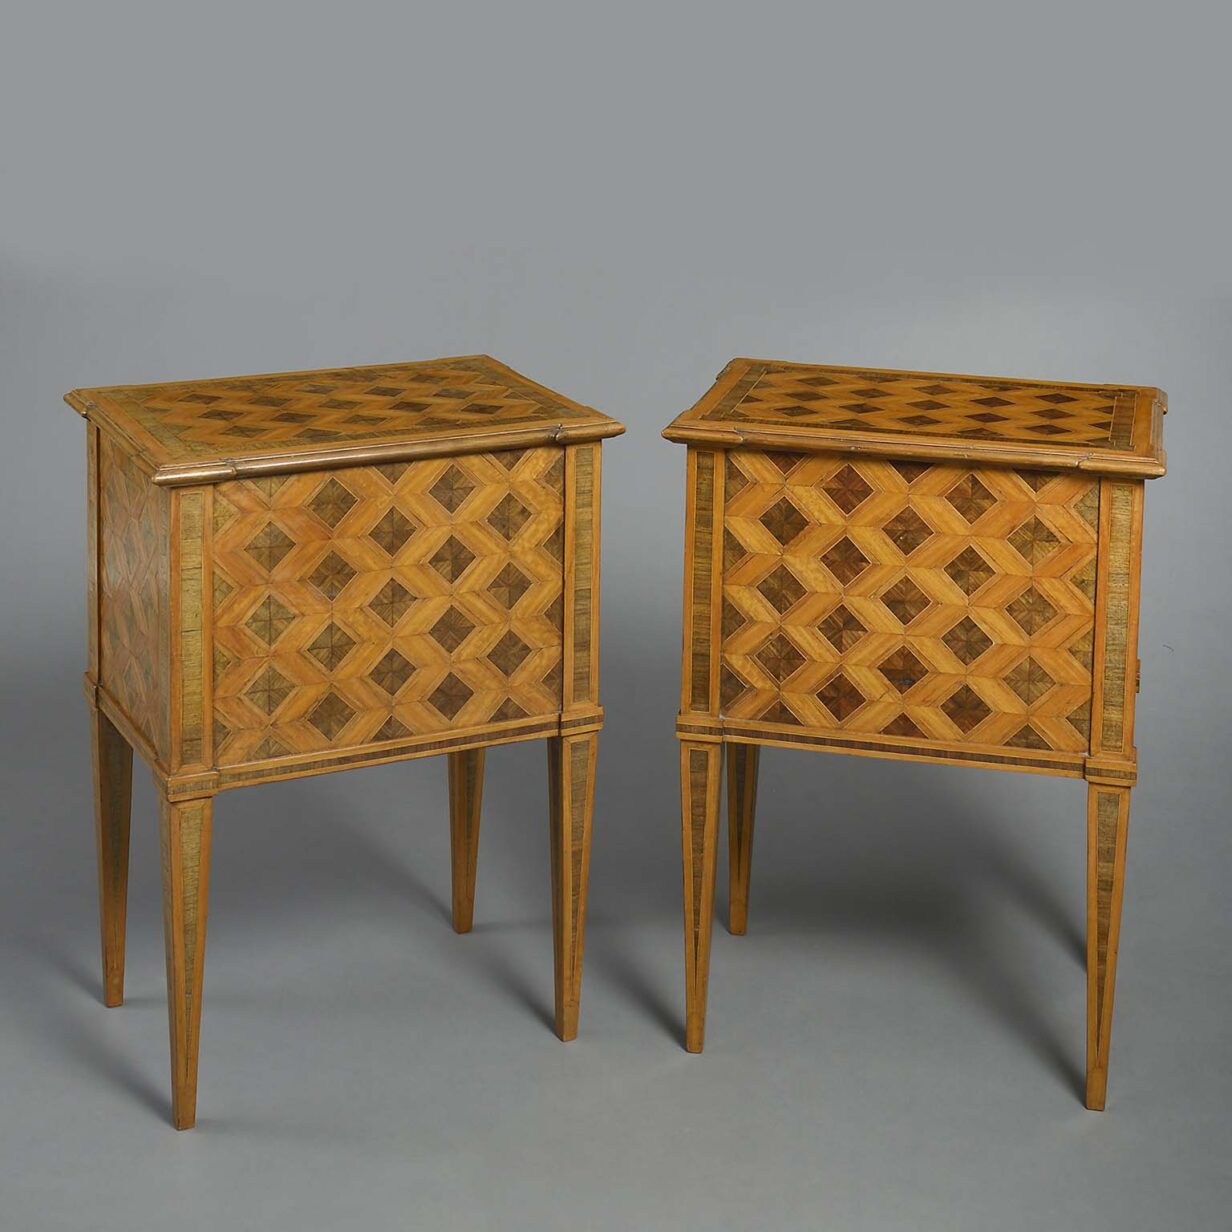 Pair of parquetry bedside cabinets